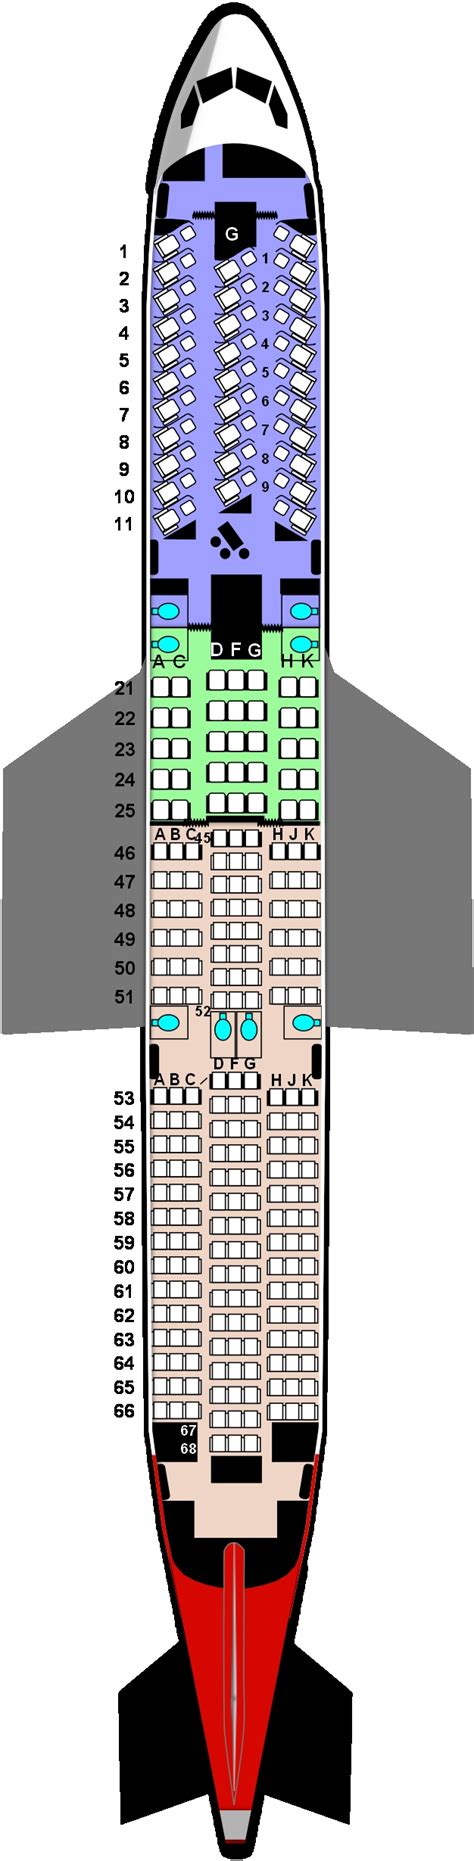 MAP United 787 9 Seat Map